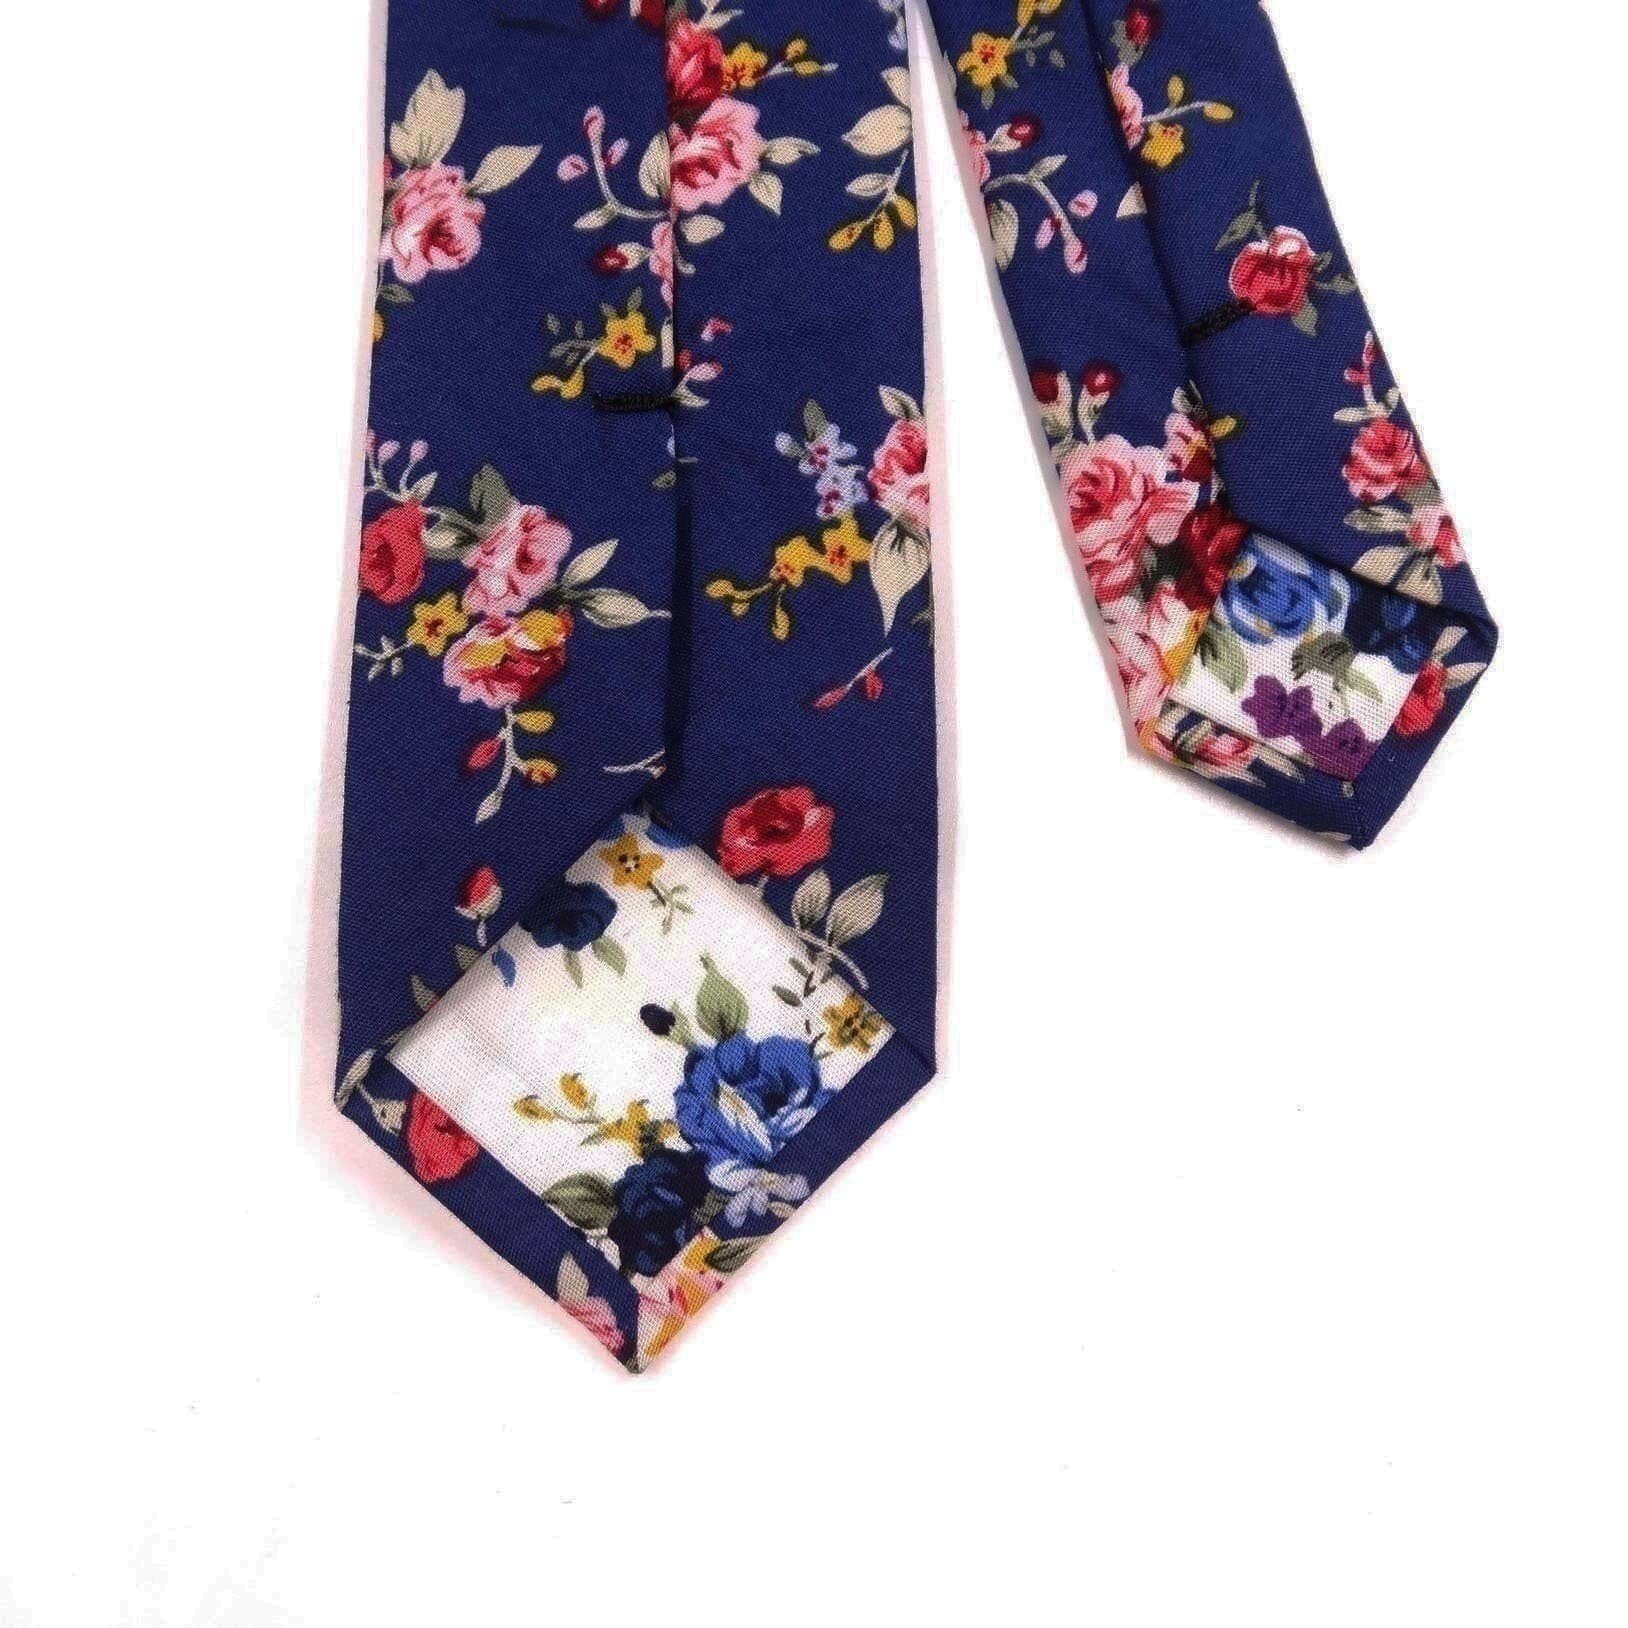 Navy Blue Floral Tie" (AUSTIN) MYTIESHOP-Neckties-Navy Blue Floral Tie Floral Necktie for weddings and events great for prom and gifts Mens ties near me us tie shops cool skinny slim flower ideas gifts for-Mytieshop. Skinny ties for weddings anniversaries. Father of bride. Groomsmen. Cool skinny neckties for men. Neckwear for prom, missions and fancy events. Gift ideas for men. Anniversaries ideas. Wedding aesthetics. Flower ties. Dry flower ties.